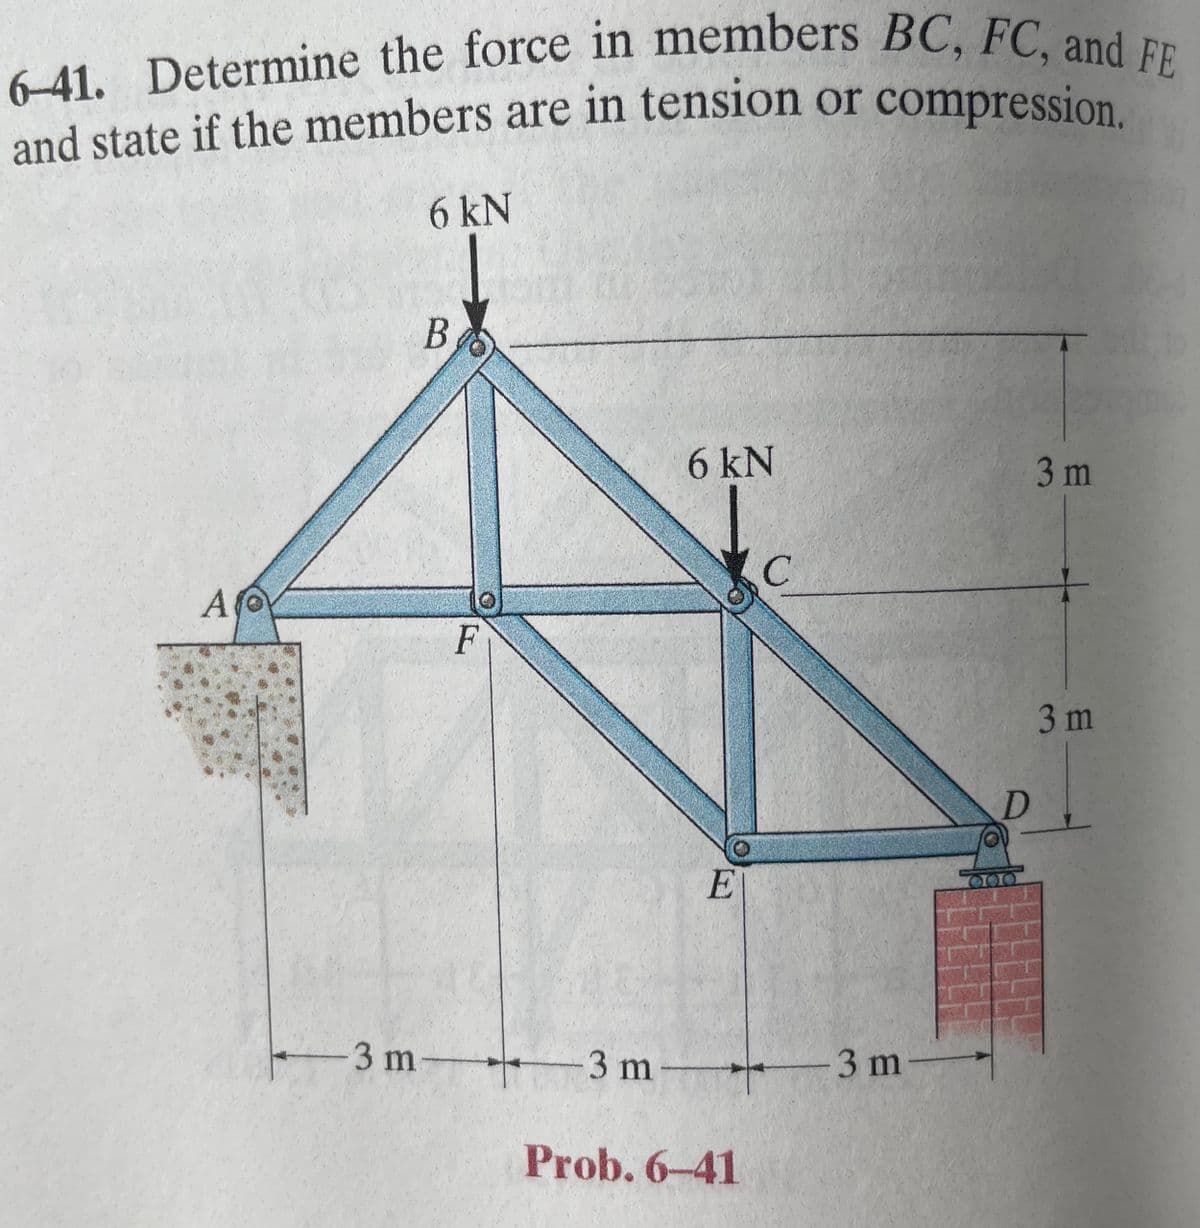 6-41. Determine the force in members BC, FC, and FE
and state if the members are in tension or compression.
A
6 kN
B
-3 m-
F
-3 m
6 kN
E
C
+
Prob. 6-41
-3 m
D
3 m
3 m